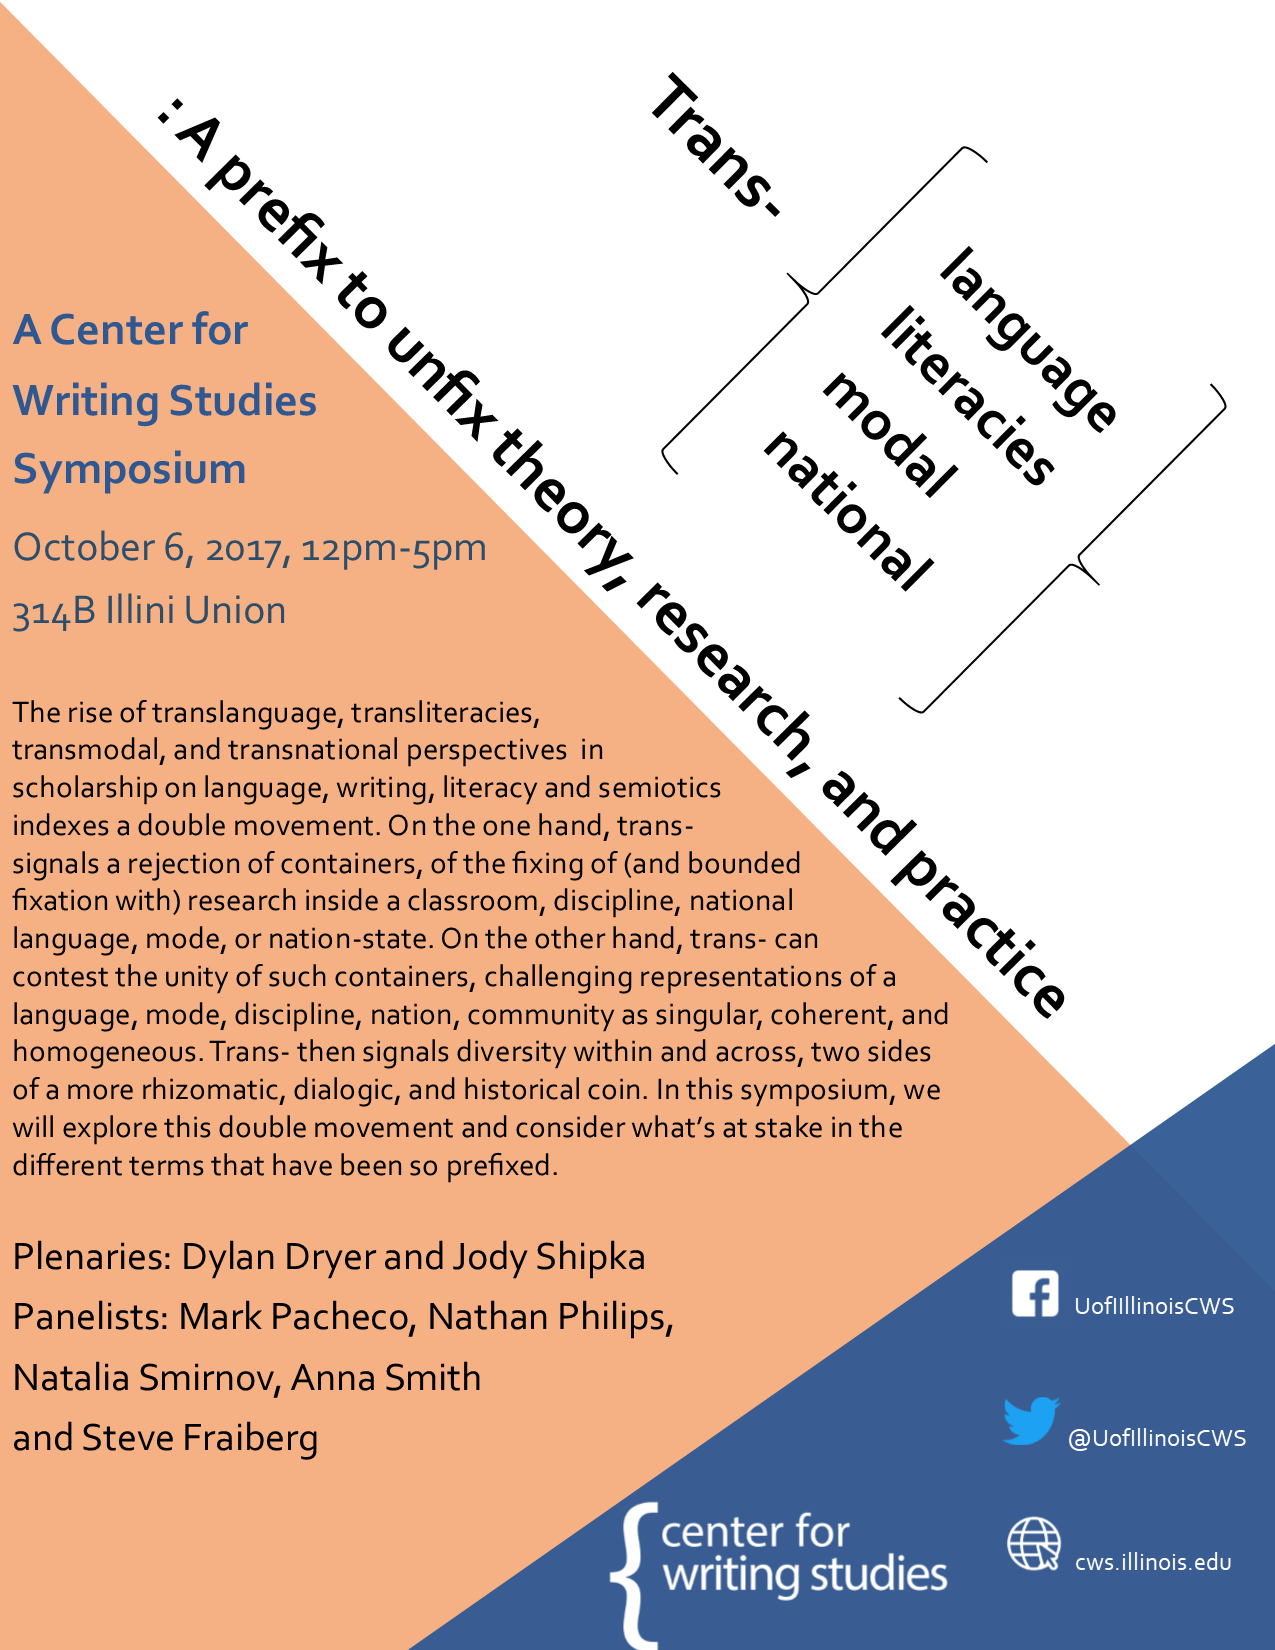 Event flyer with orange and blue and white angular background with the text Trans-[language, literacies, modal, national]: A prefix to unfix theory, research, and practice. Descriptive text of the symposium and event information (speakers, time, date, location) appear below.